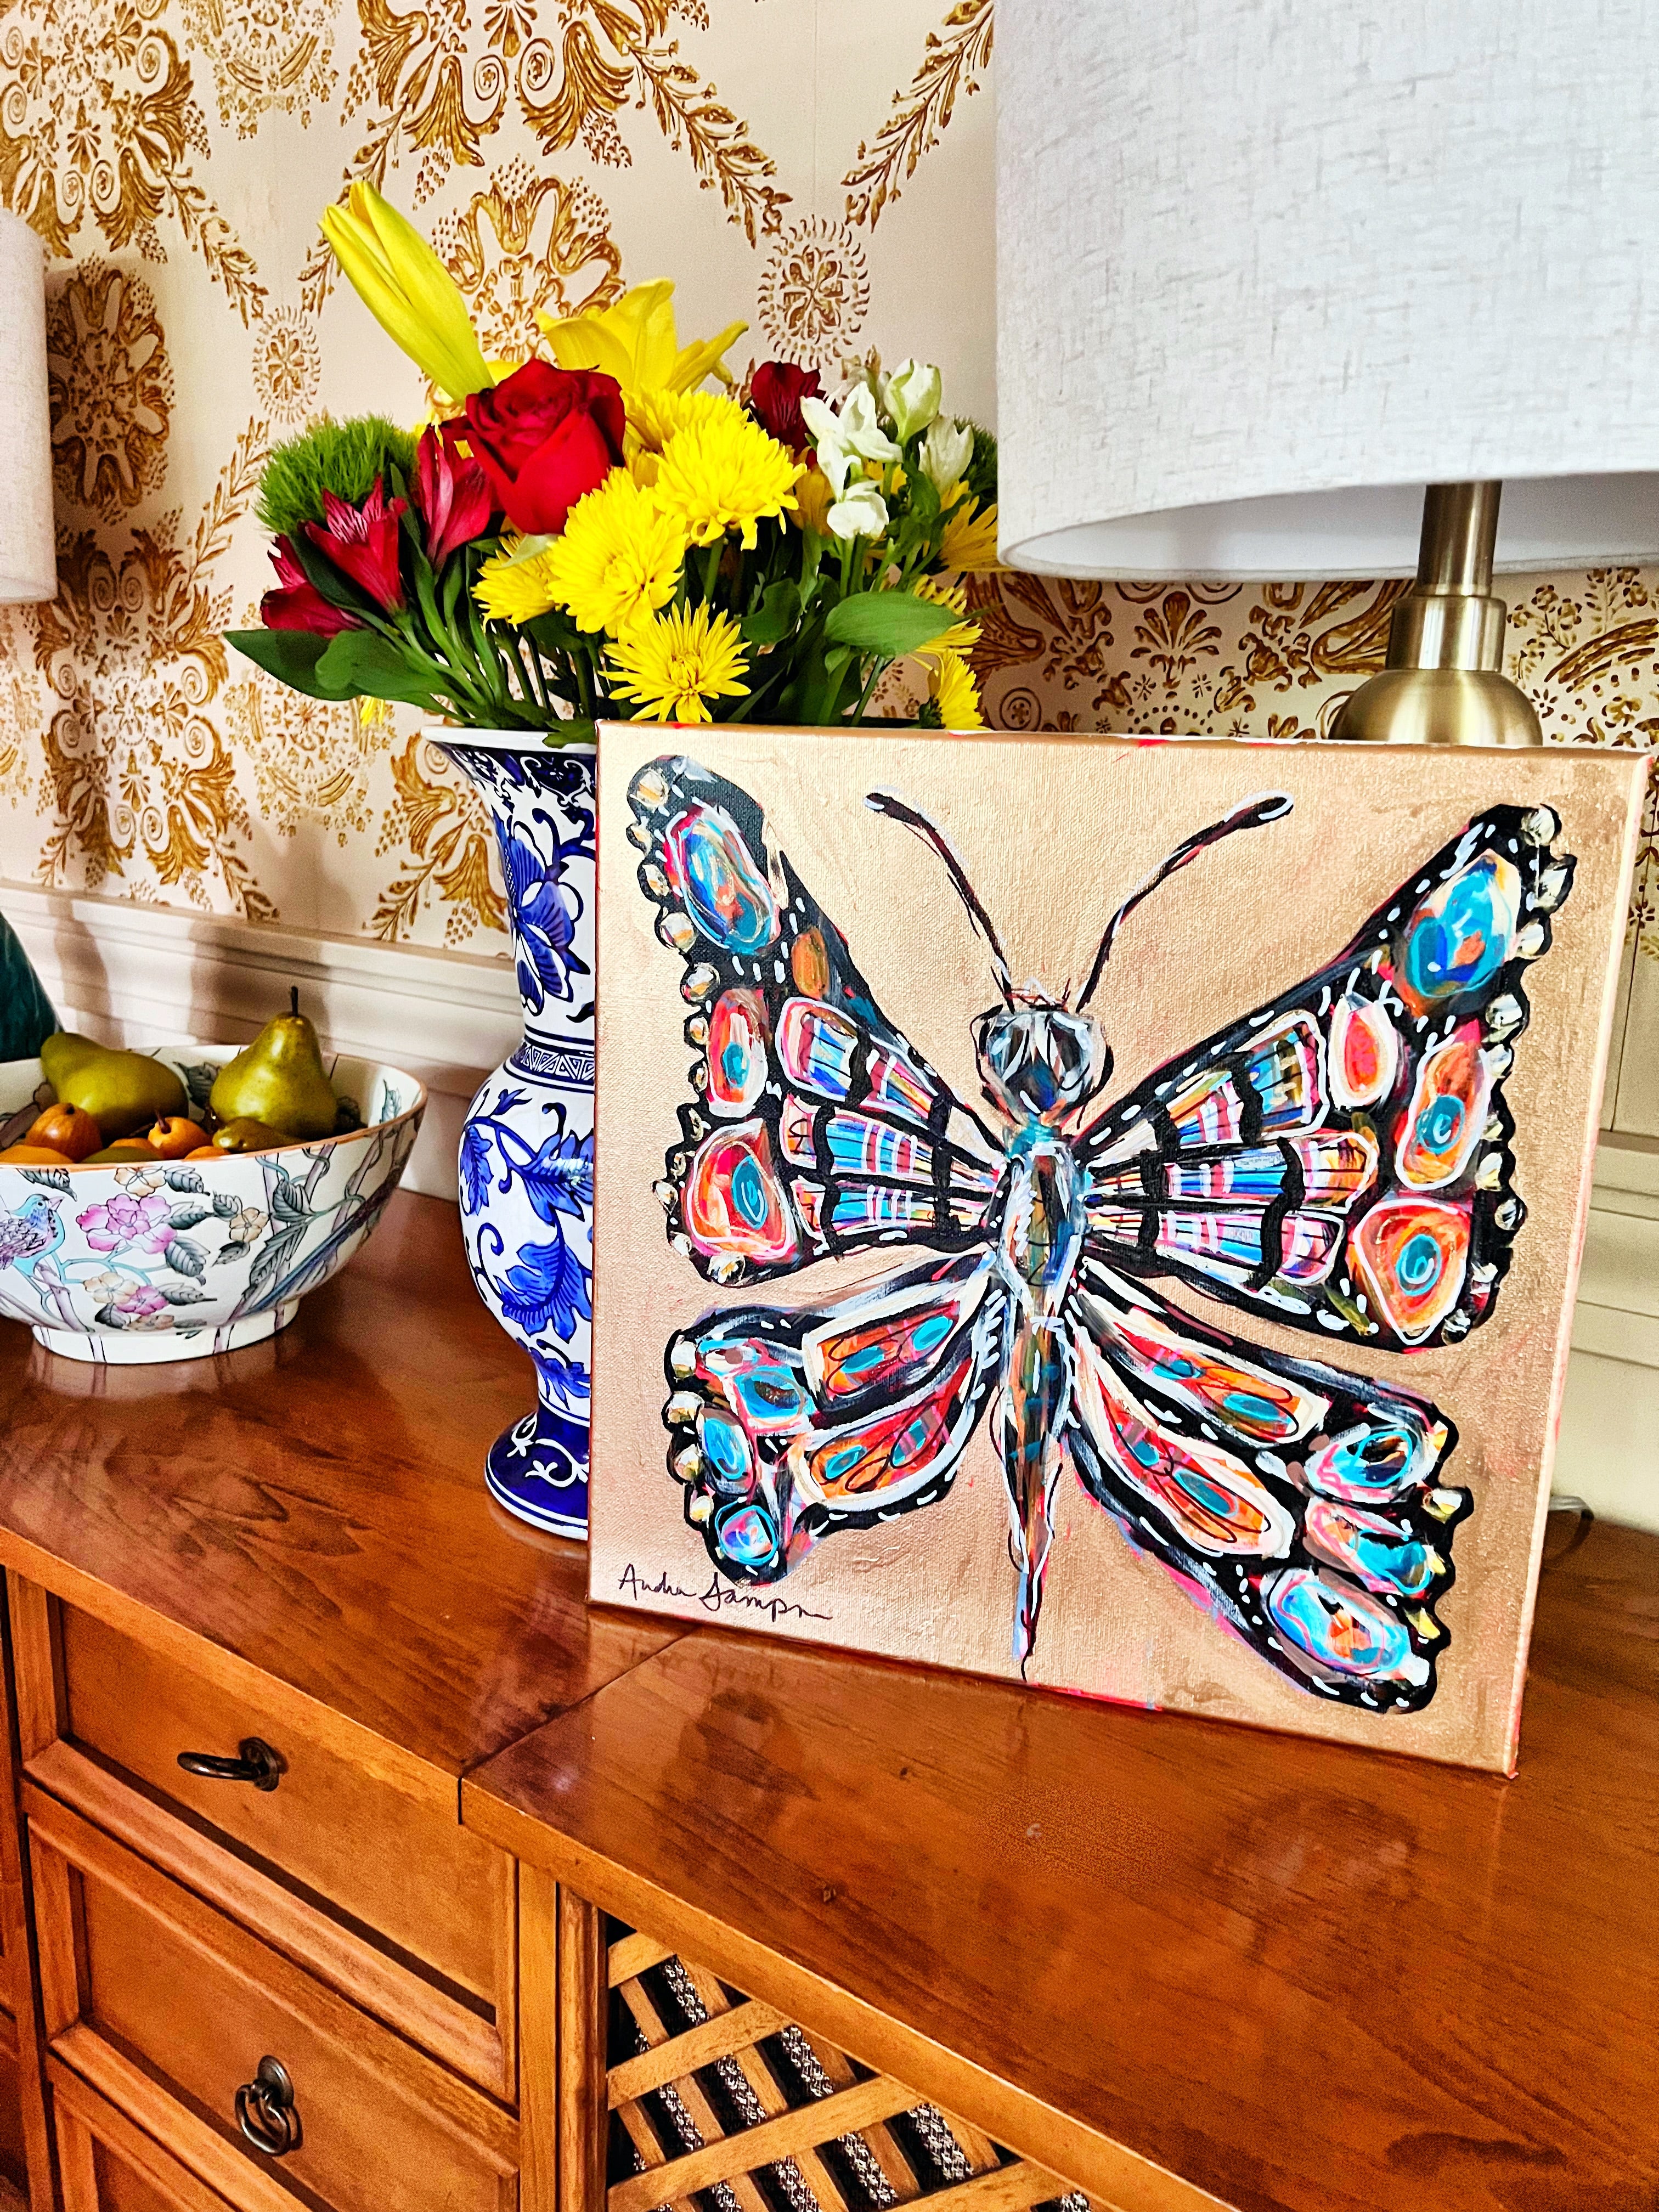 "New Beginnings" 14”x14” Original Butterfly Acrylic and Gold Leaf Painting on Canvas